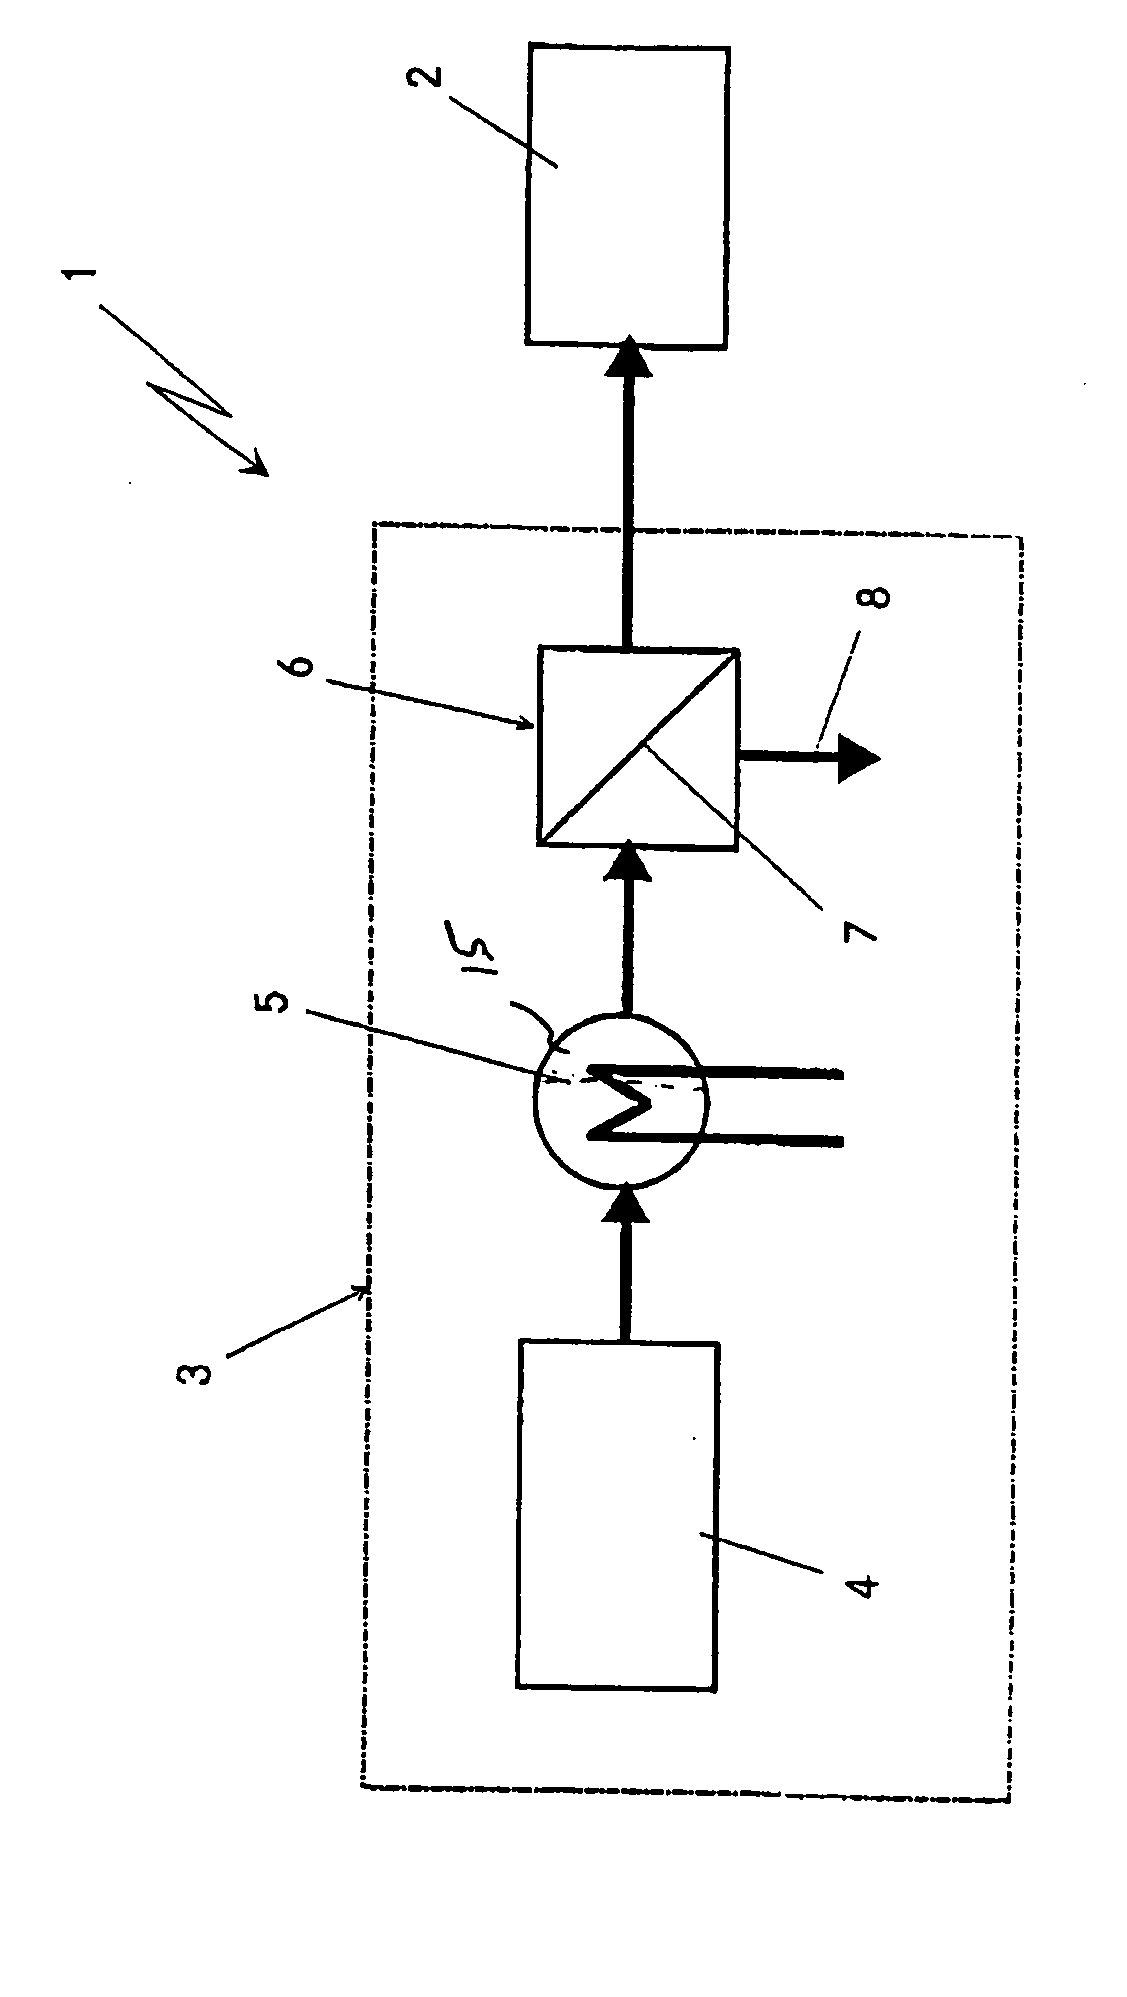 Apparatus for generating virtually pure hydrogen for fuel cells